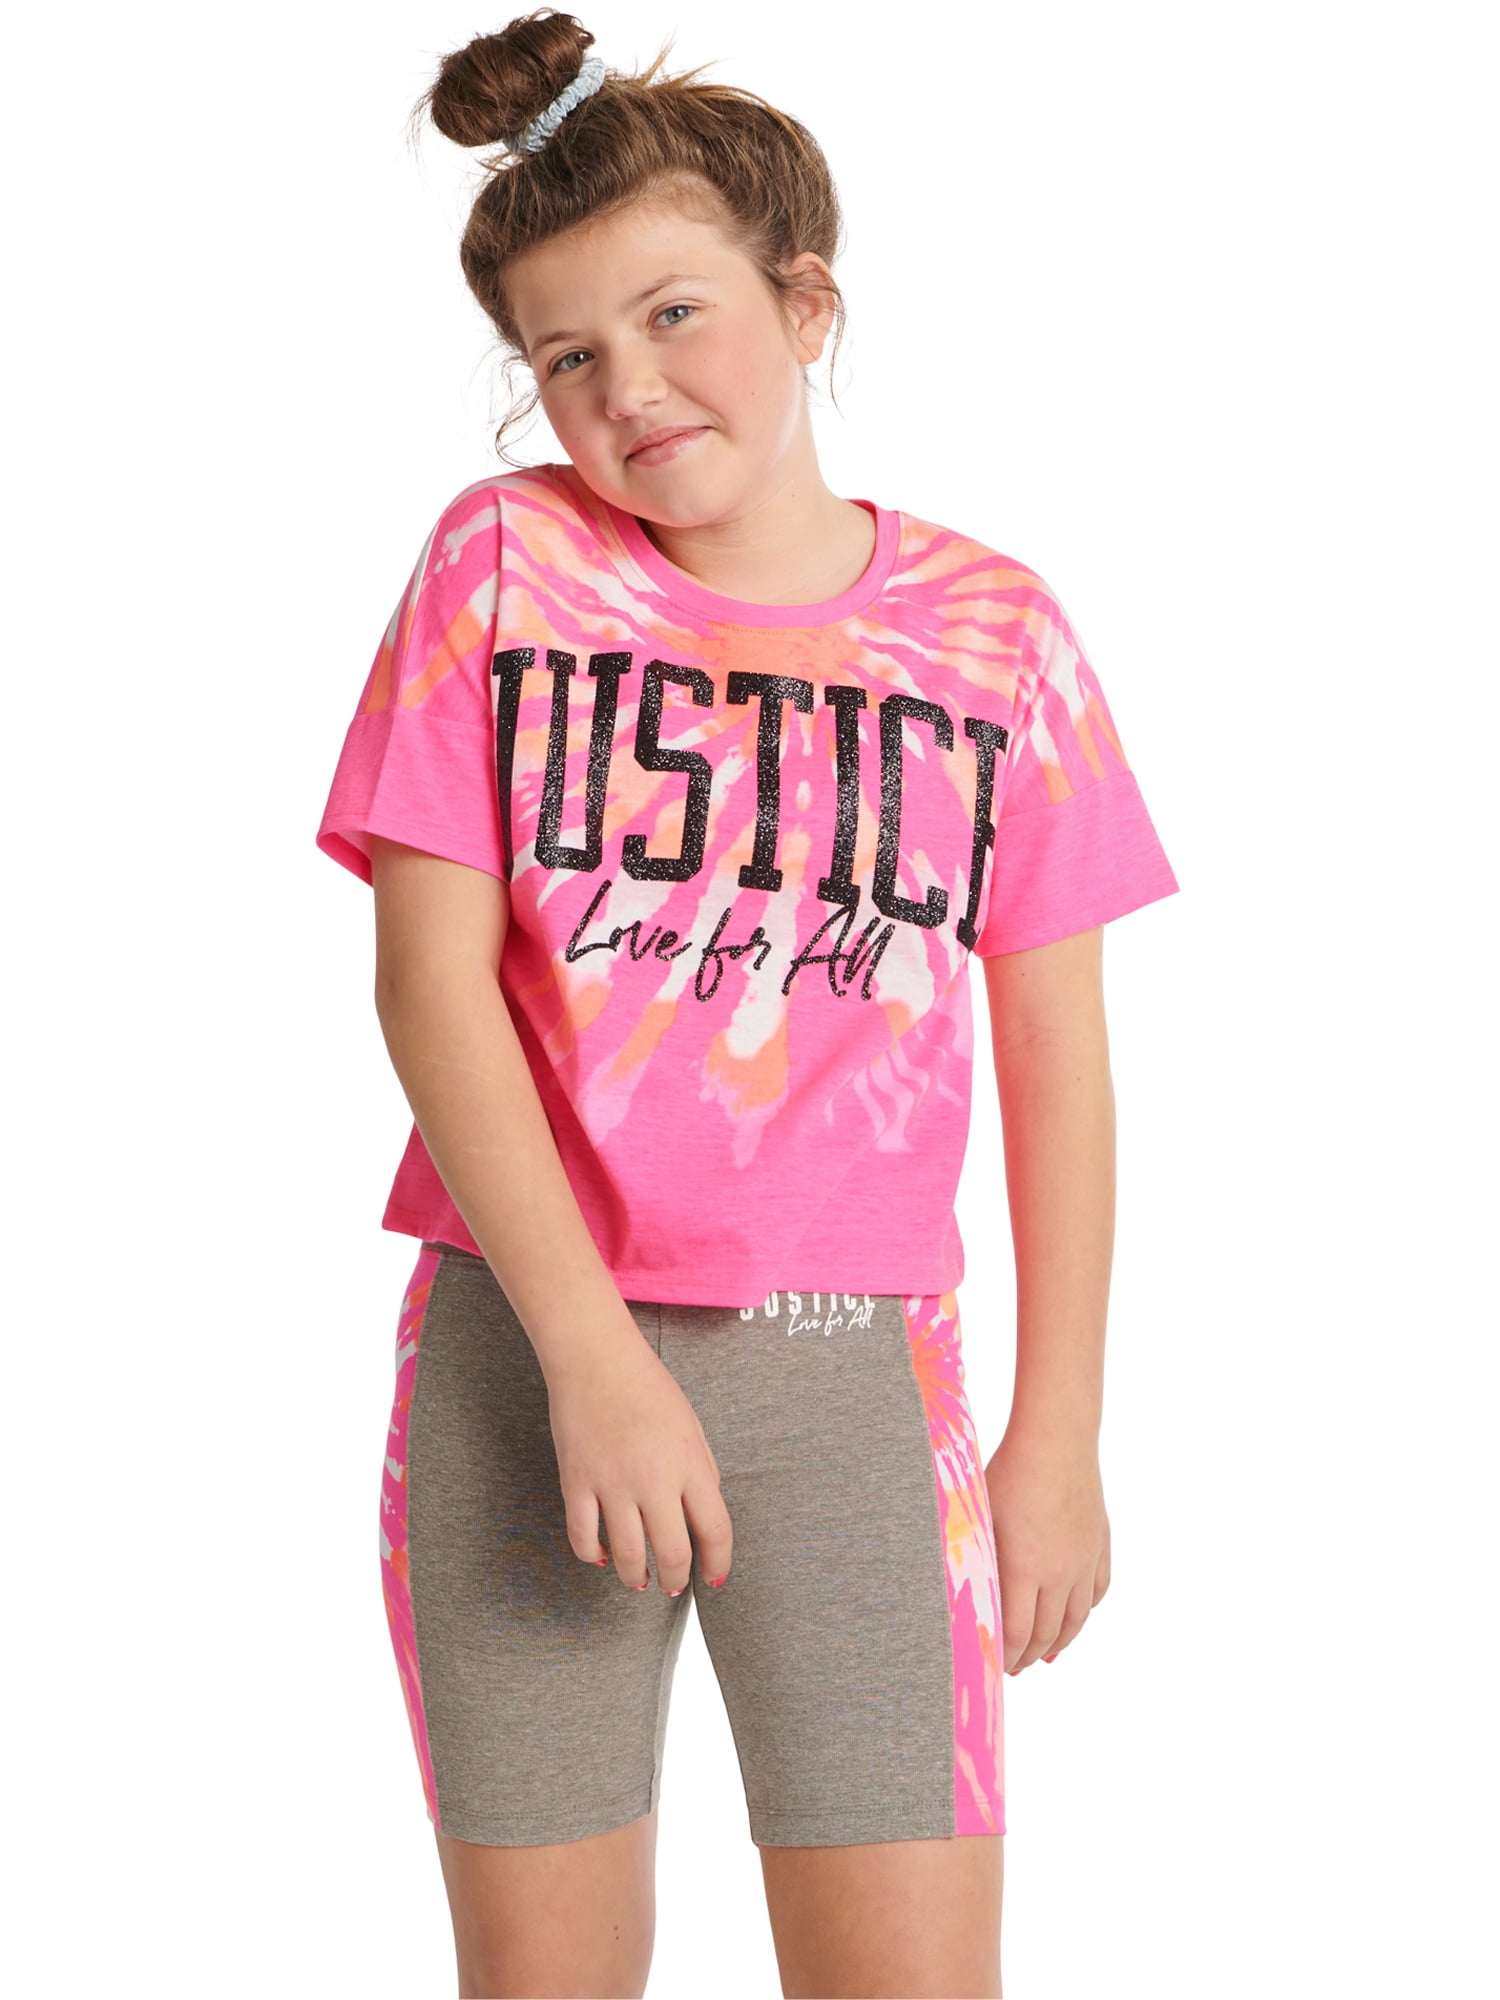 Childrens justice clothing - Girls tops & t-shirts